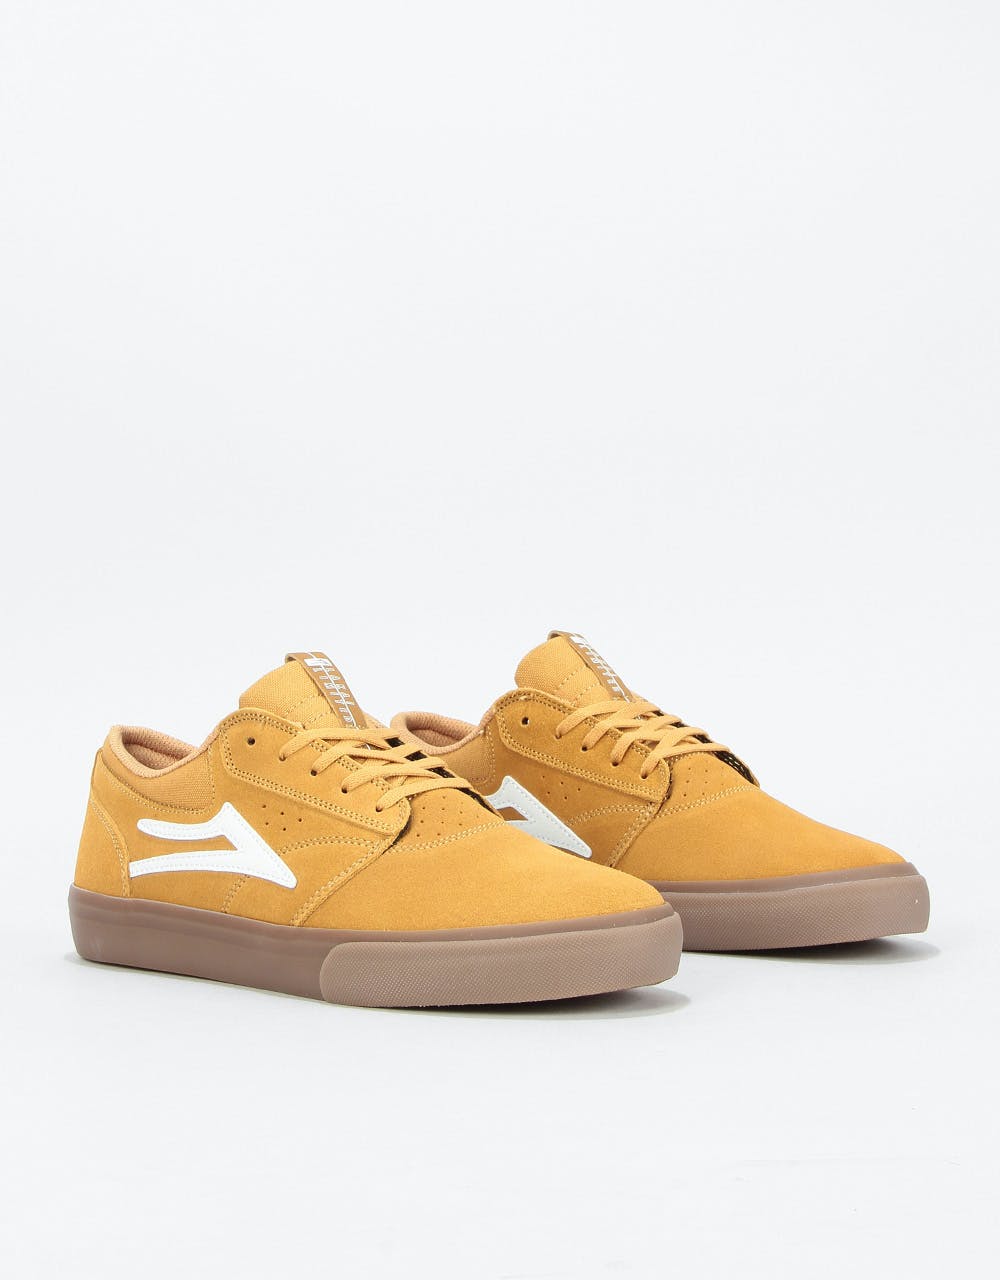 Lakai Griffin Skate Shoes - Gold Suede